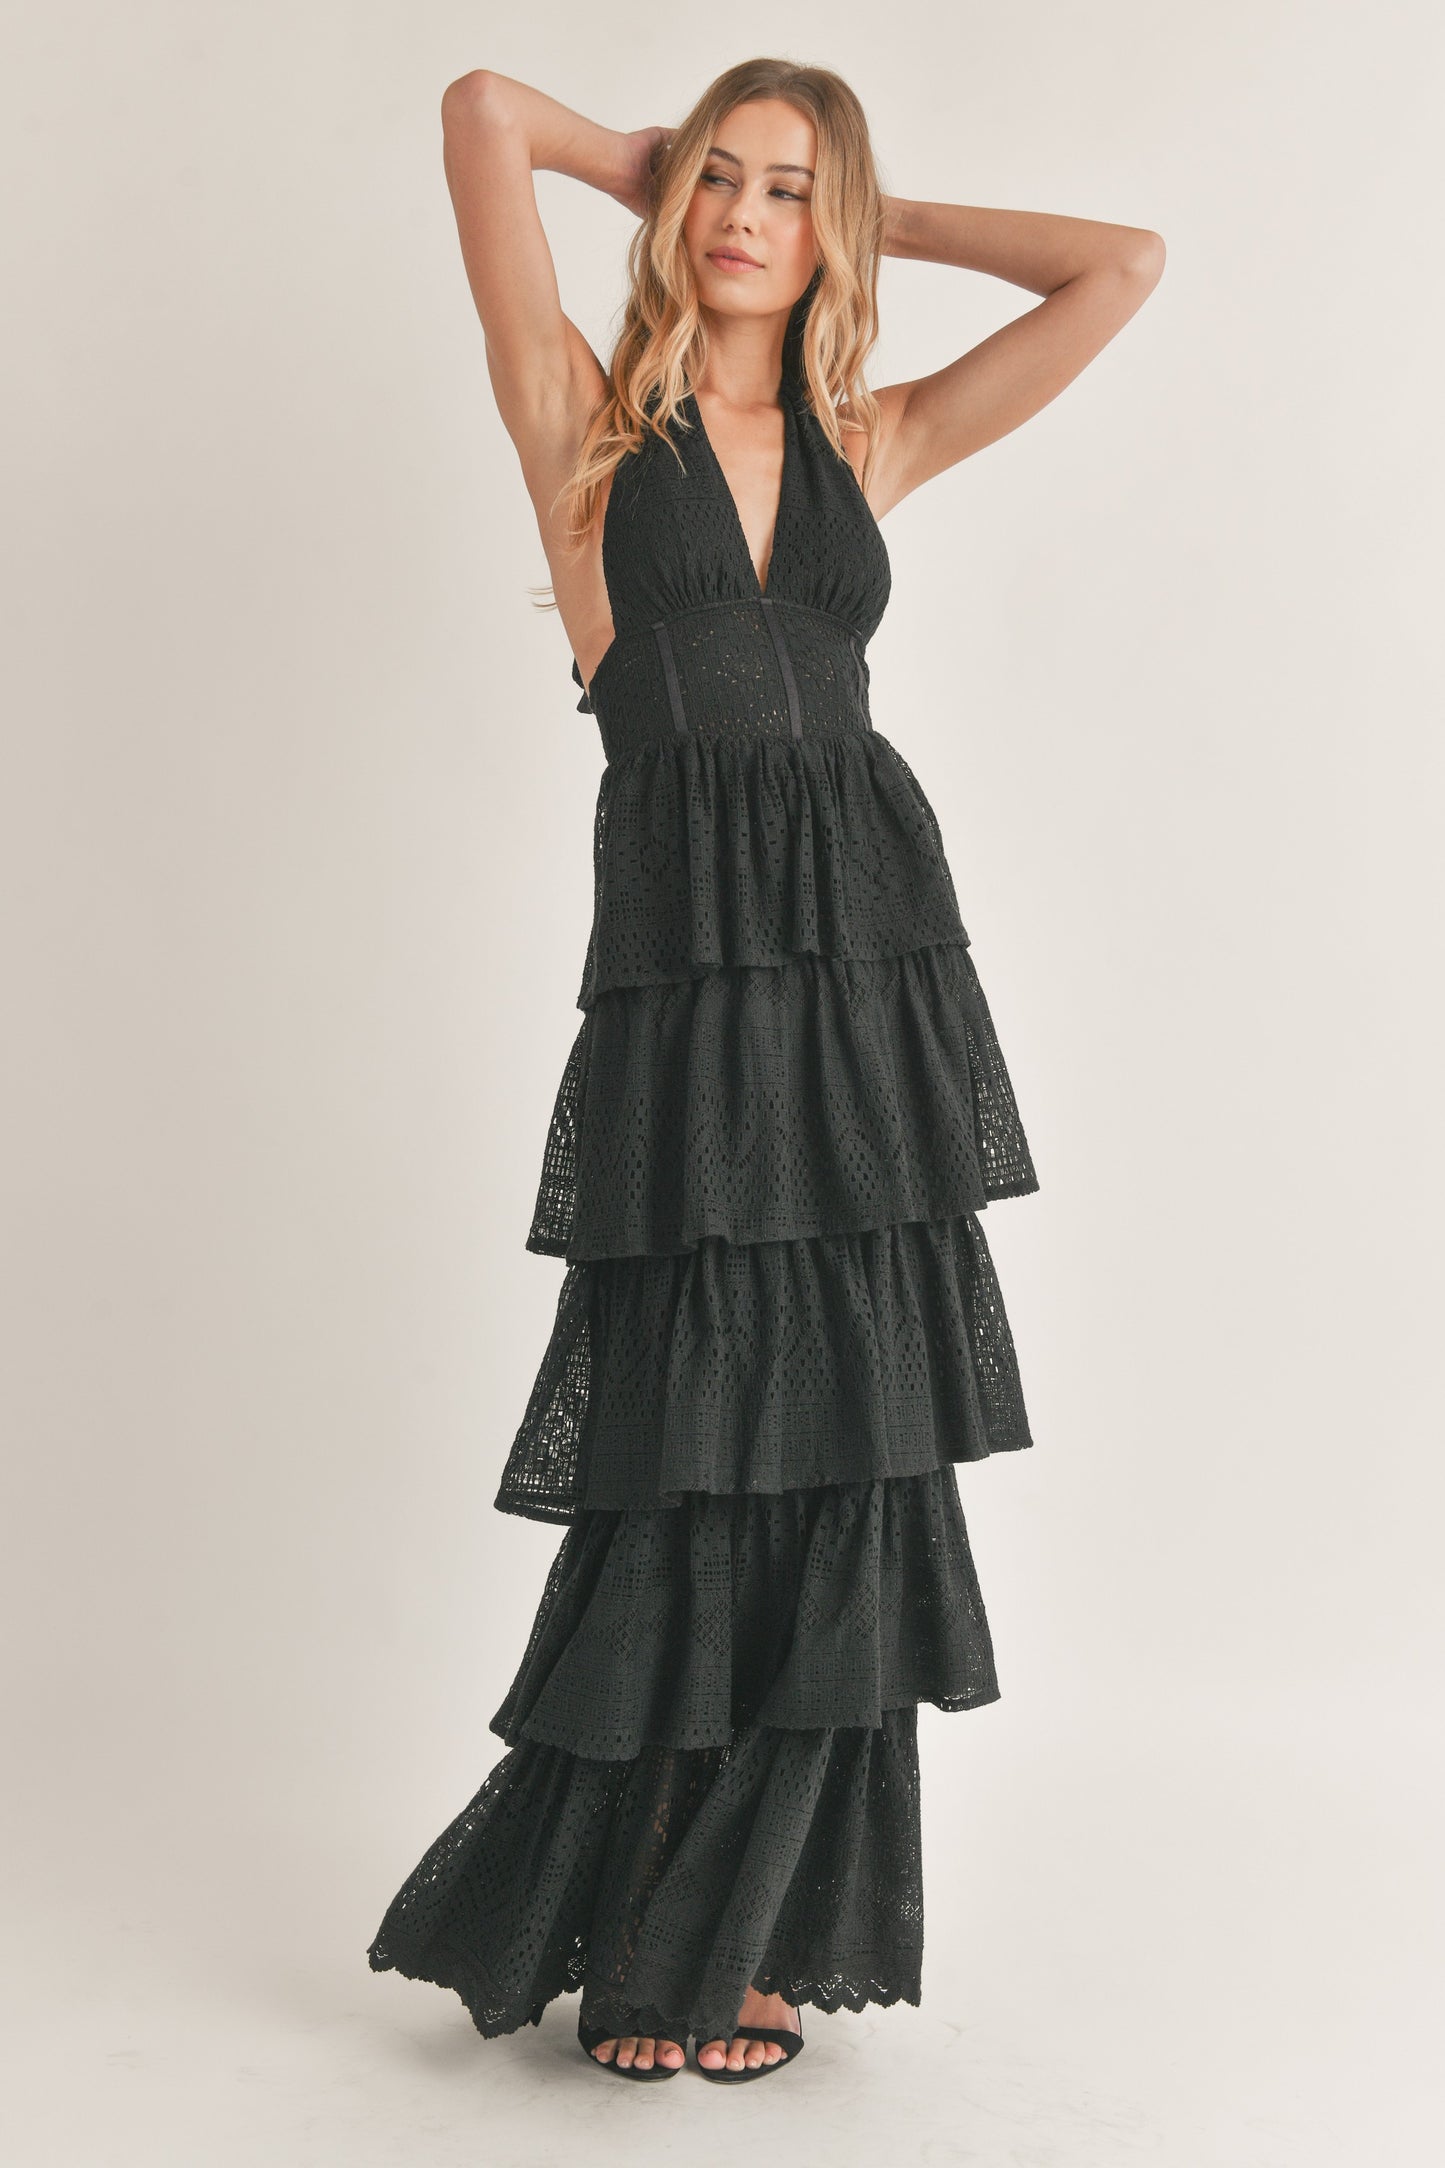 The Five Tier Layered Maxi Dress